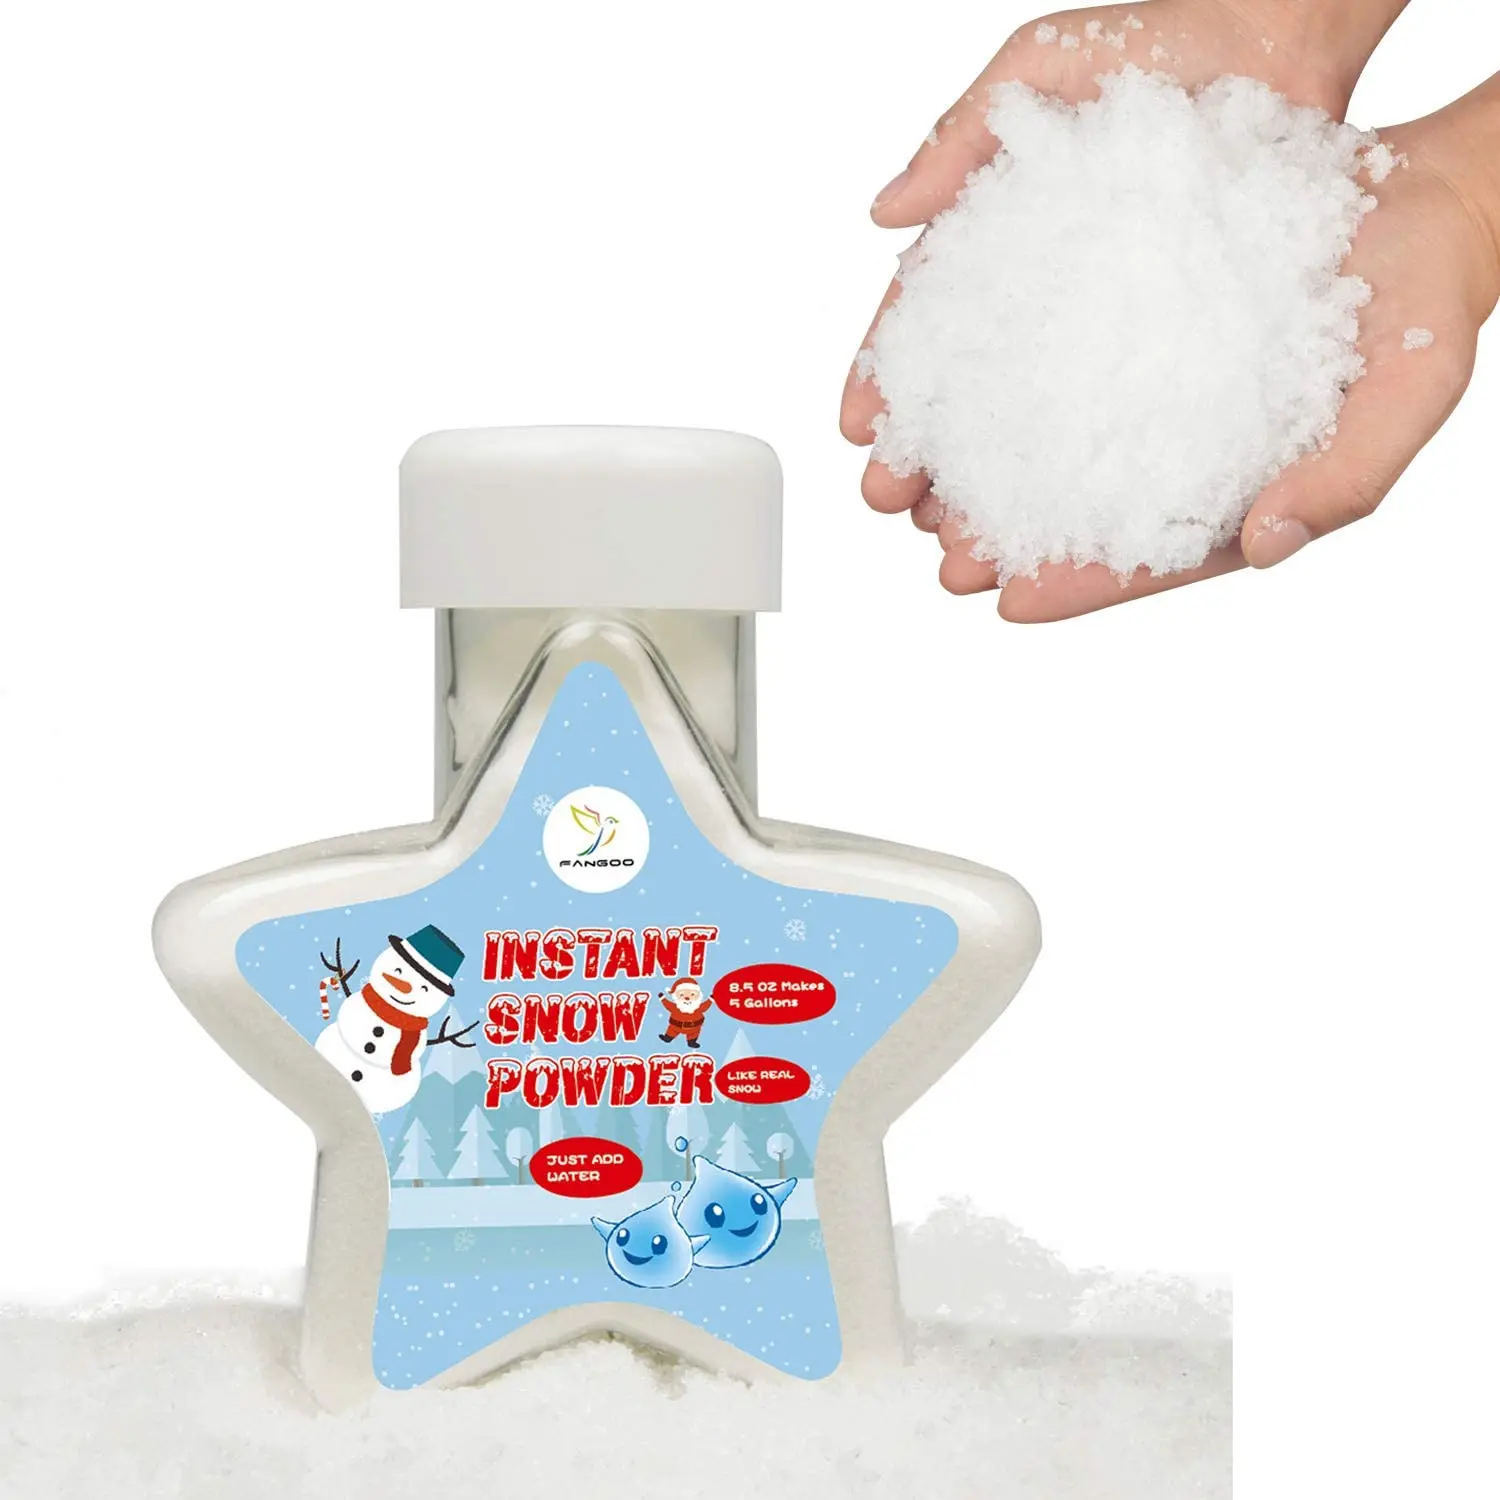 Snowonder Instant Snow Fake Artificial Snow, Also Great for Making Cloud Slime - Mix Makes 4 Gallons of Fake Snow